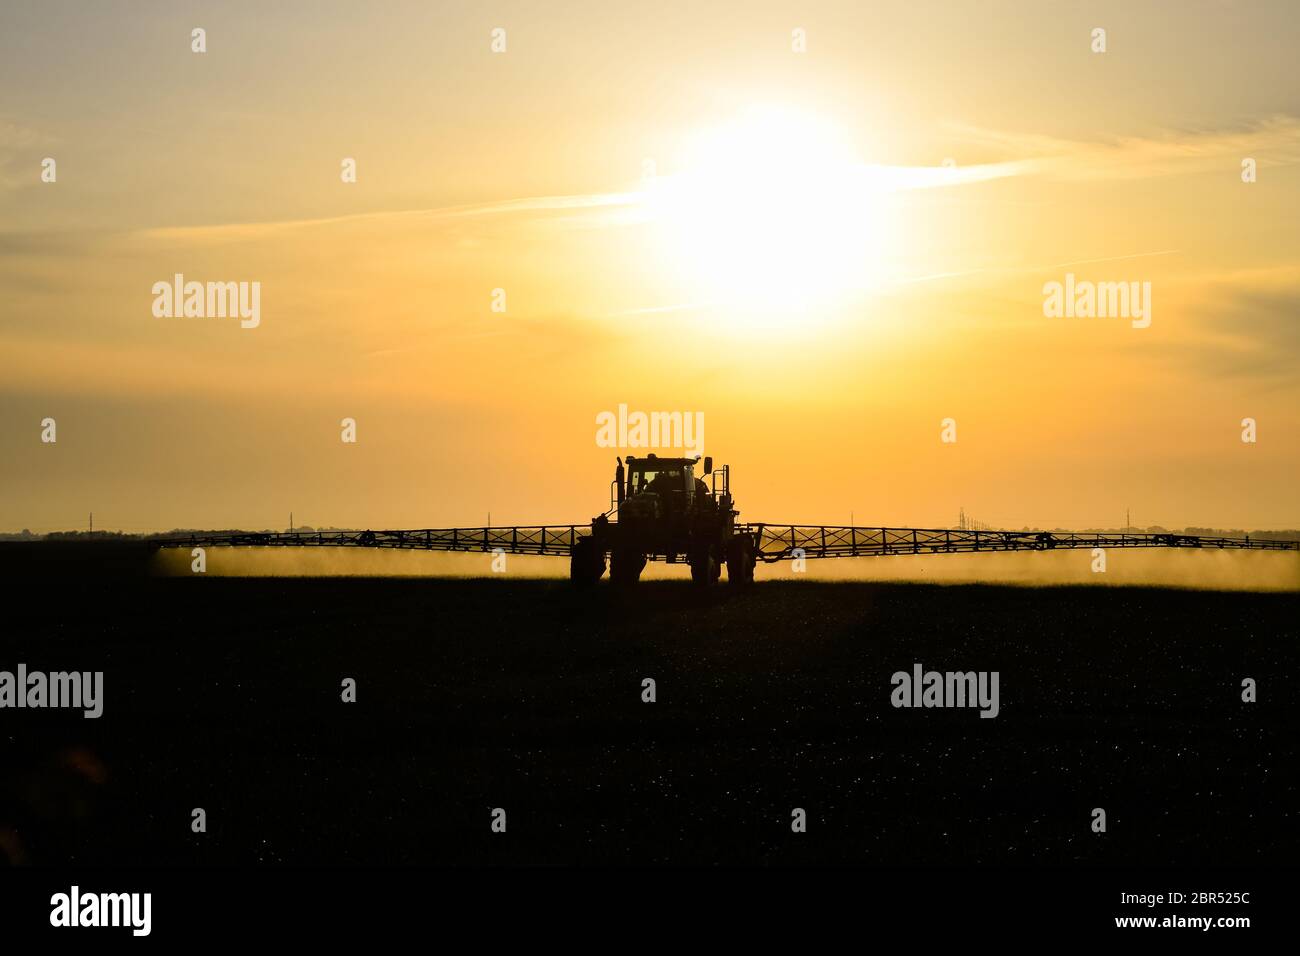 Tractor with the help of a sprayer sprays liquid fertilizers on young wheat in the field. The use of finely dispersed spray chemicals. Tractor on the Stock Photo